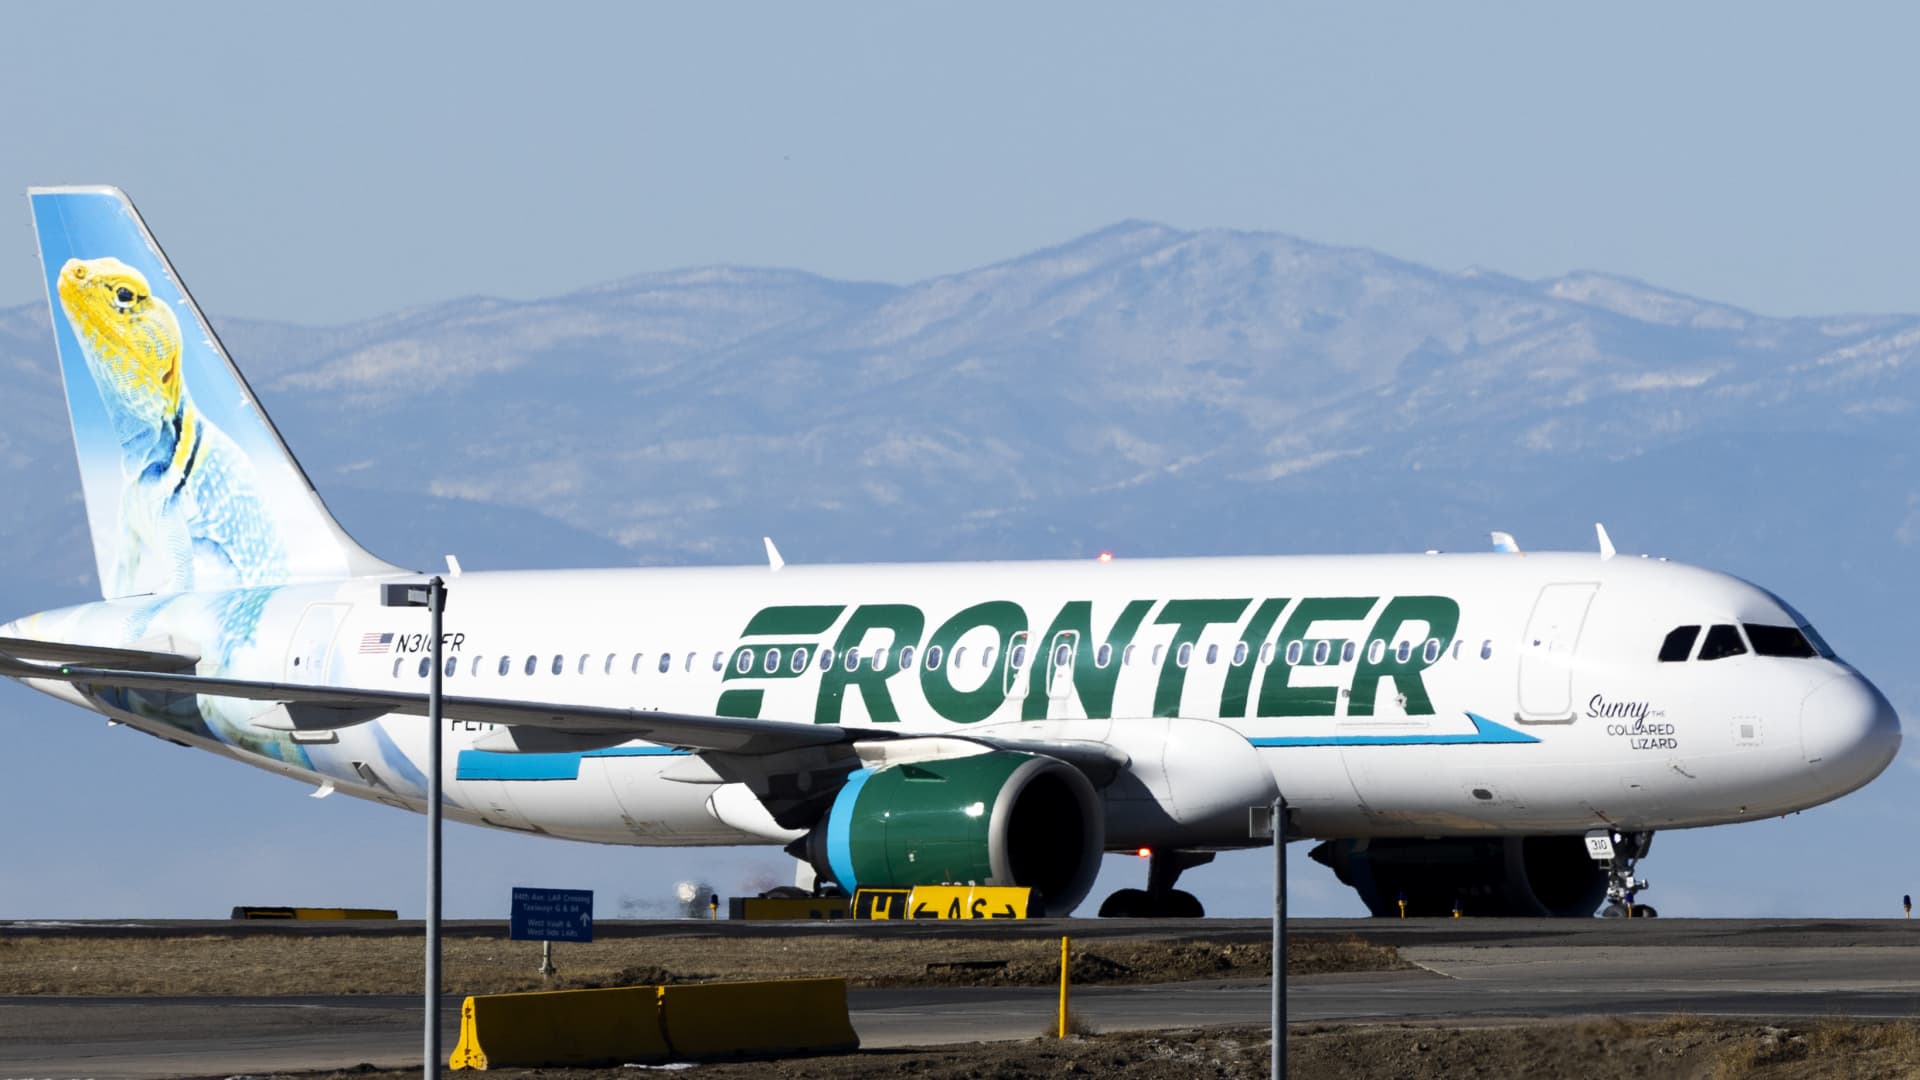 Frontier Airlines recently held talks with SpaceX about adding Starlink Wi-Fi